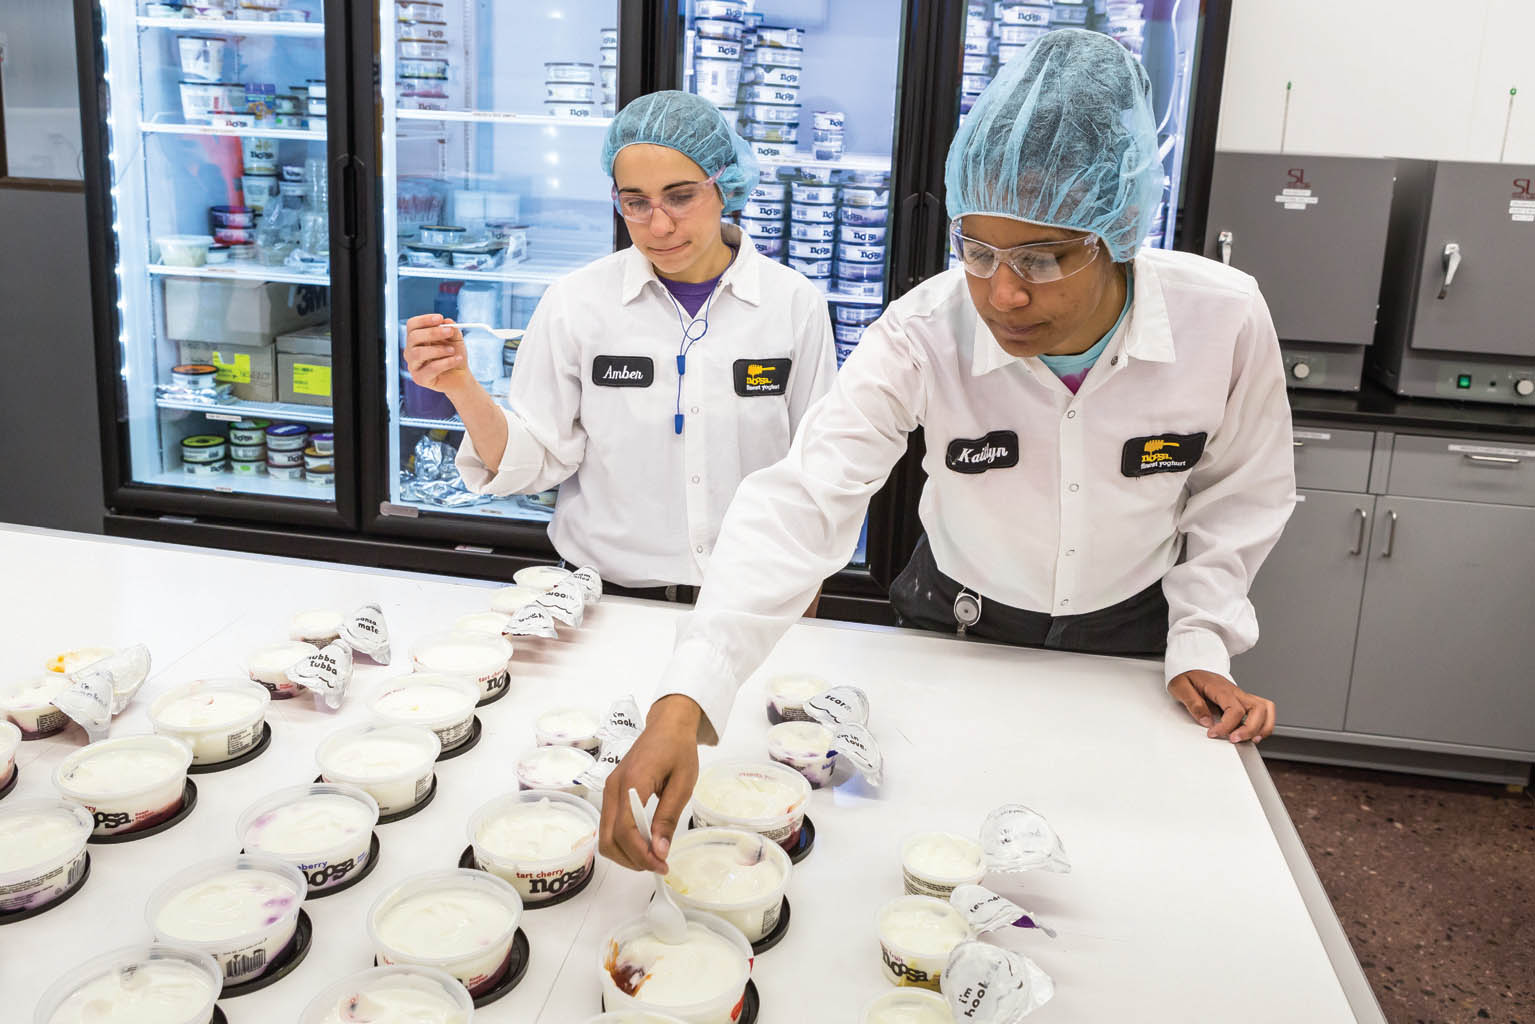 Lab technicians perform sensory evaluations of yogurts pulled from the production line.